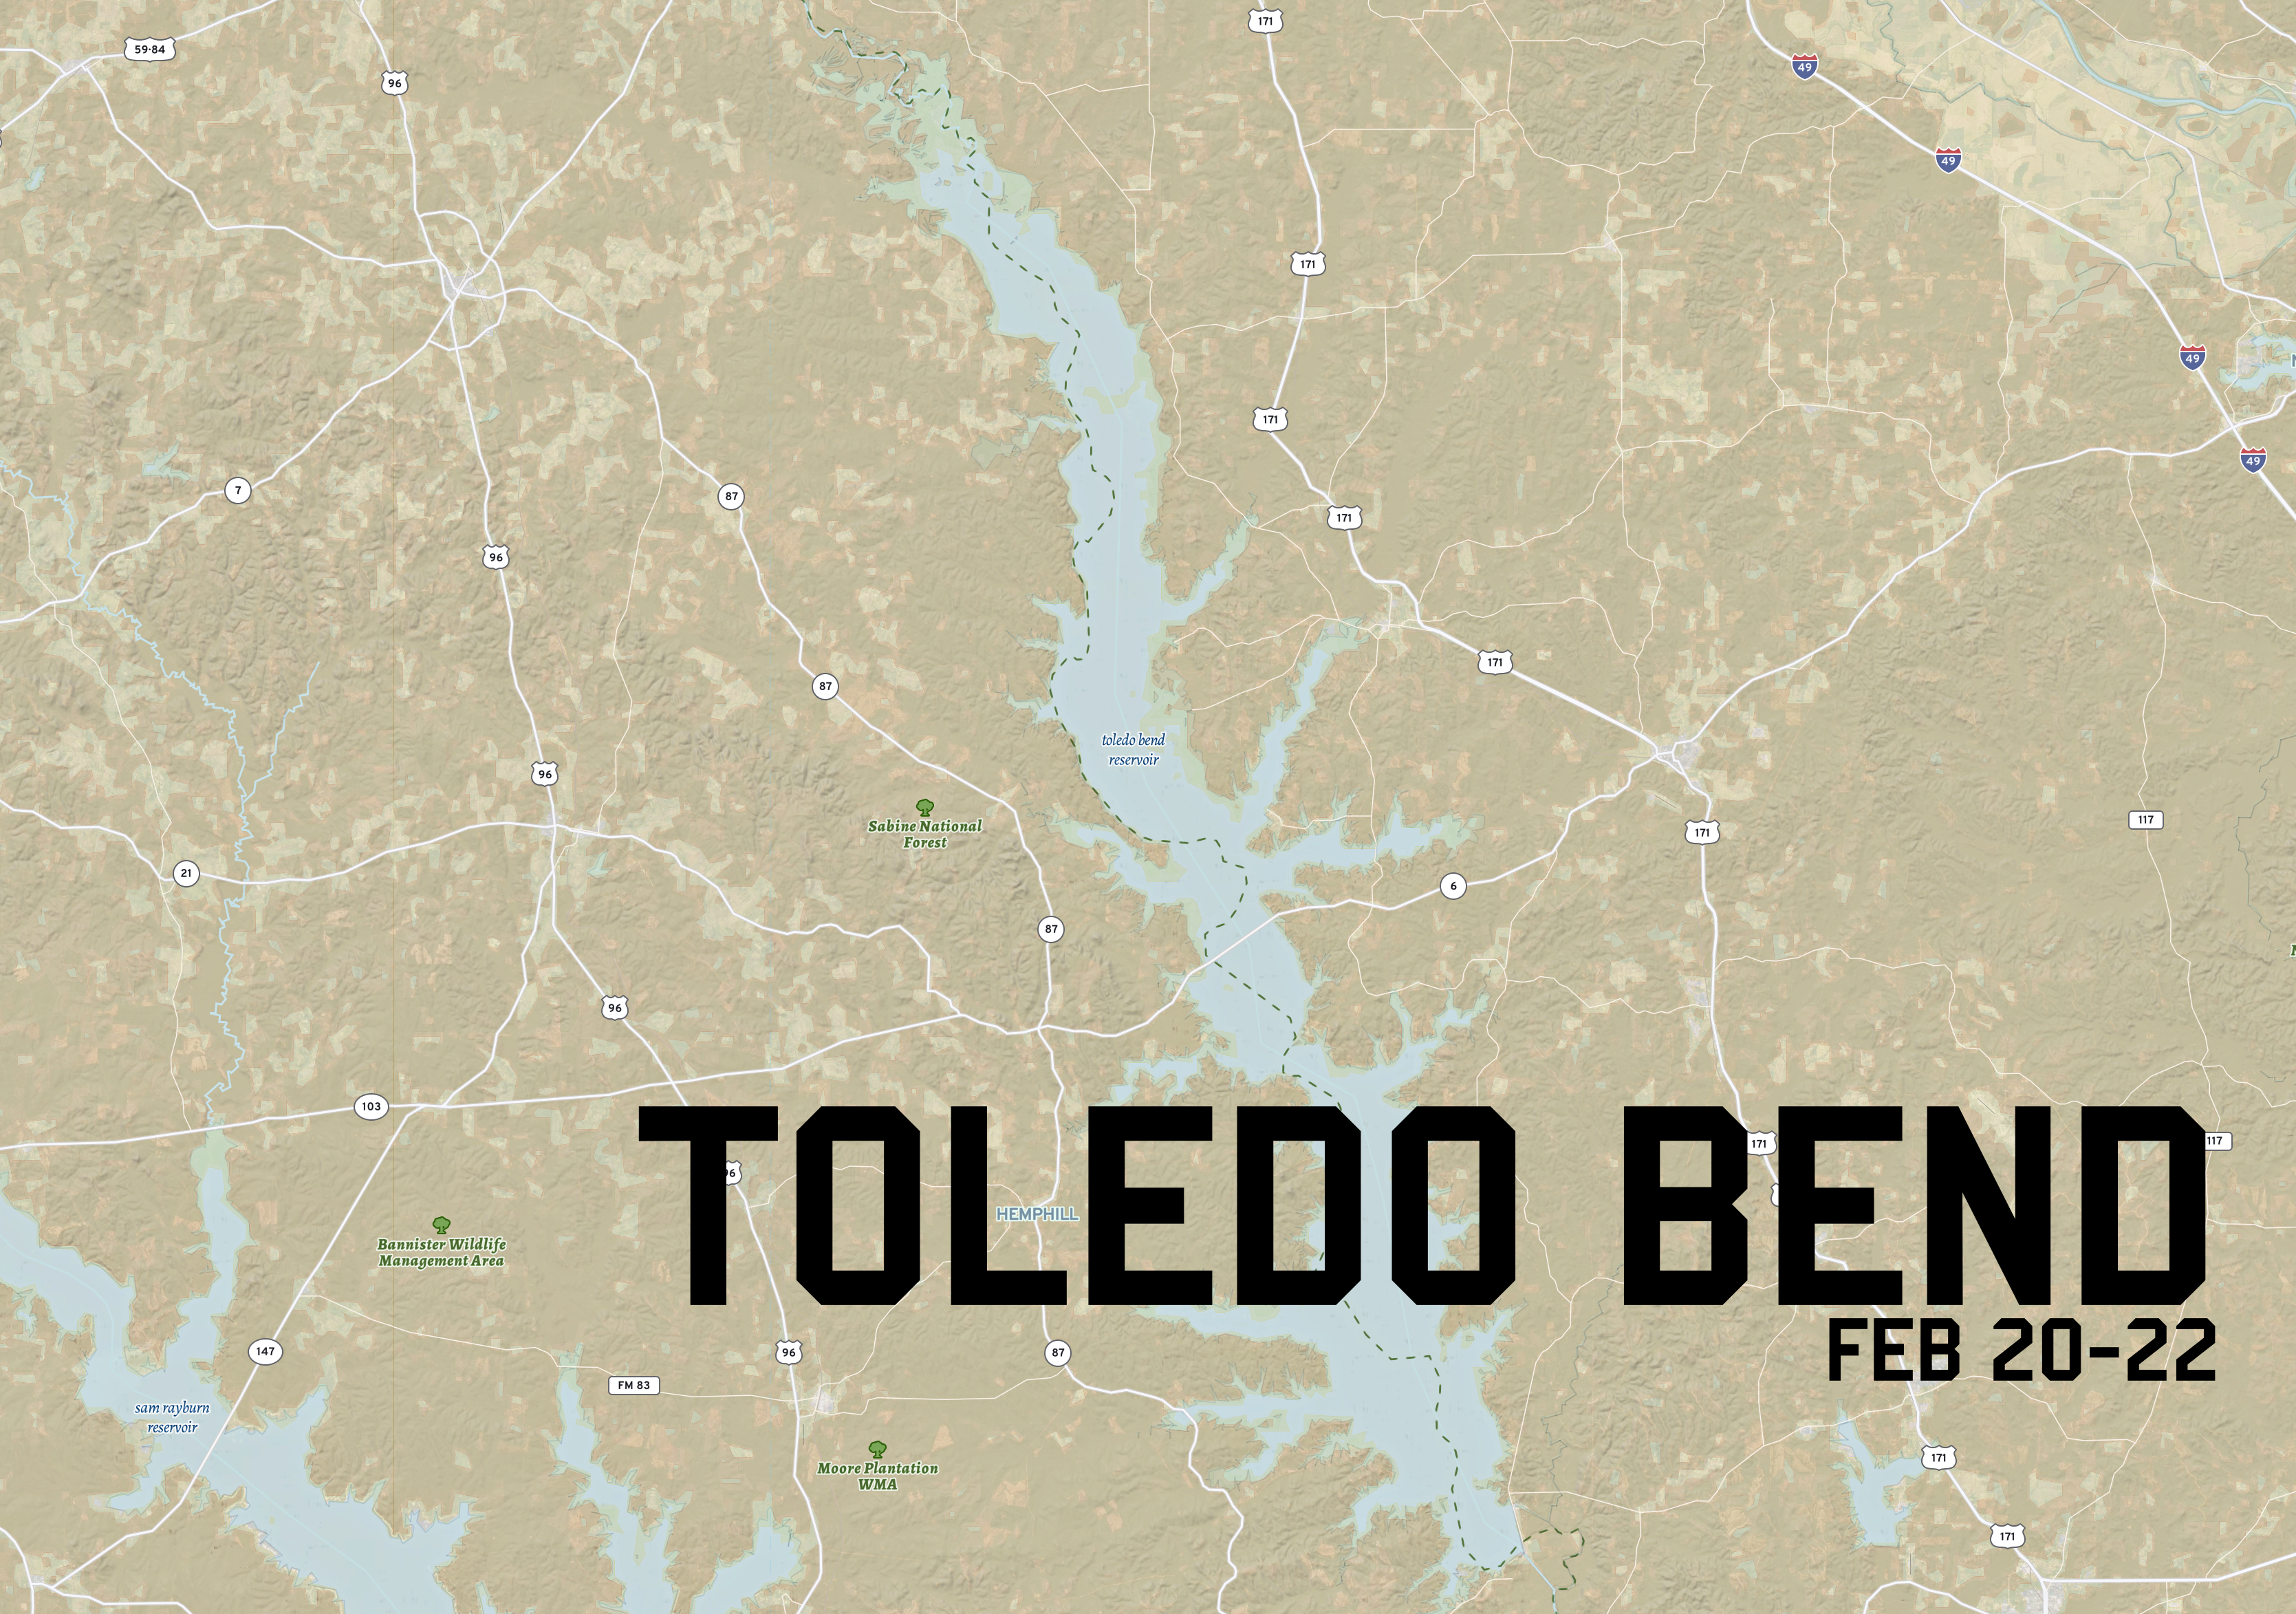 Moving to the Central Division:<br>
<h4>Toldeo Bend, Many, La. </h4>
